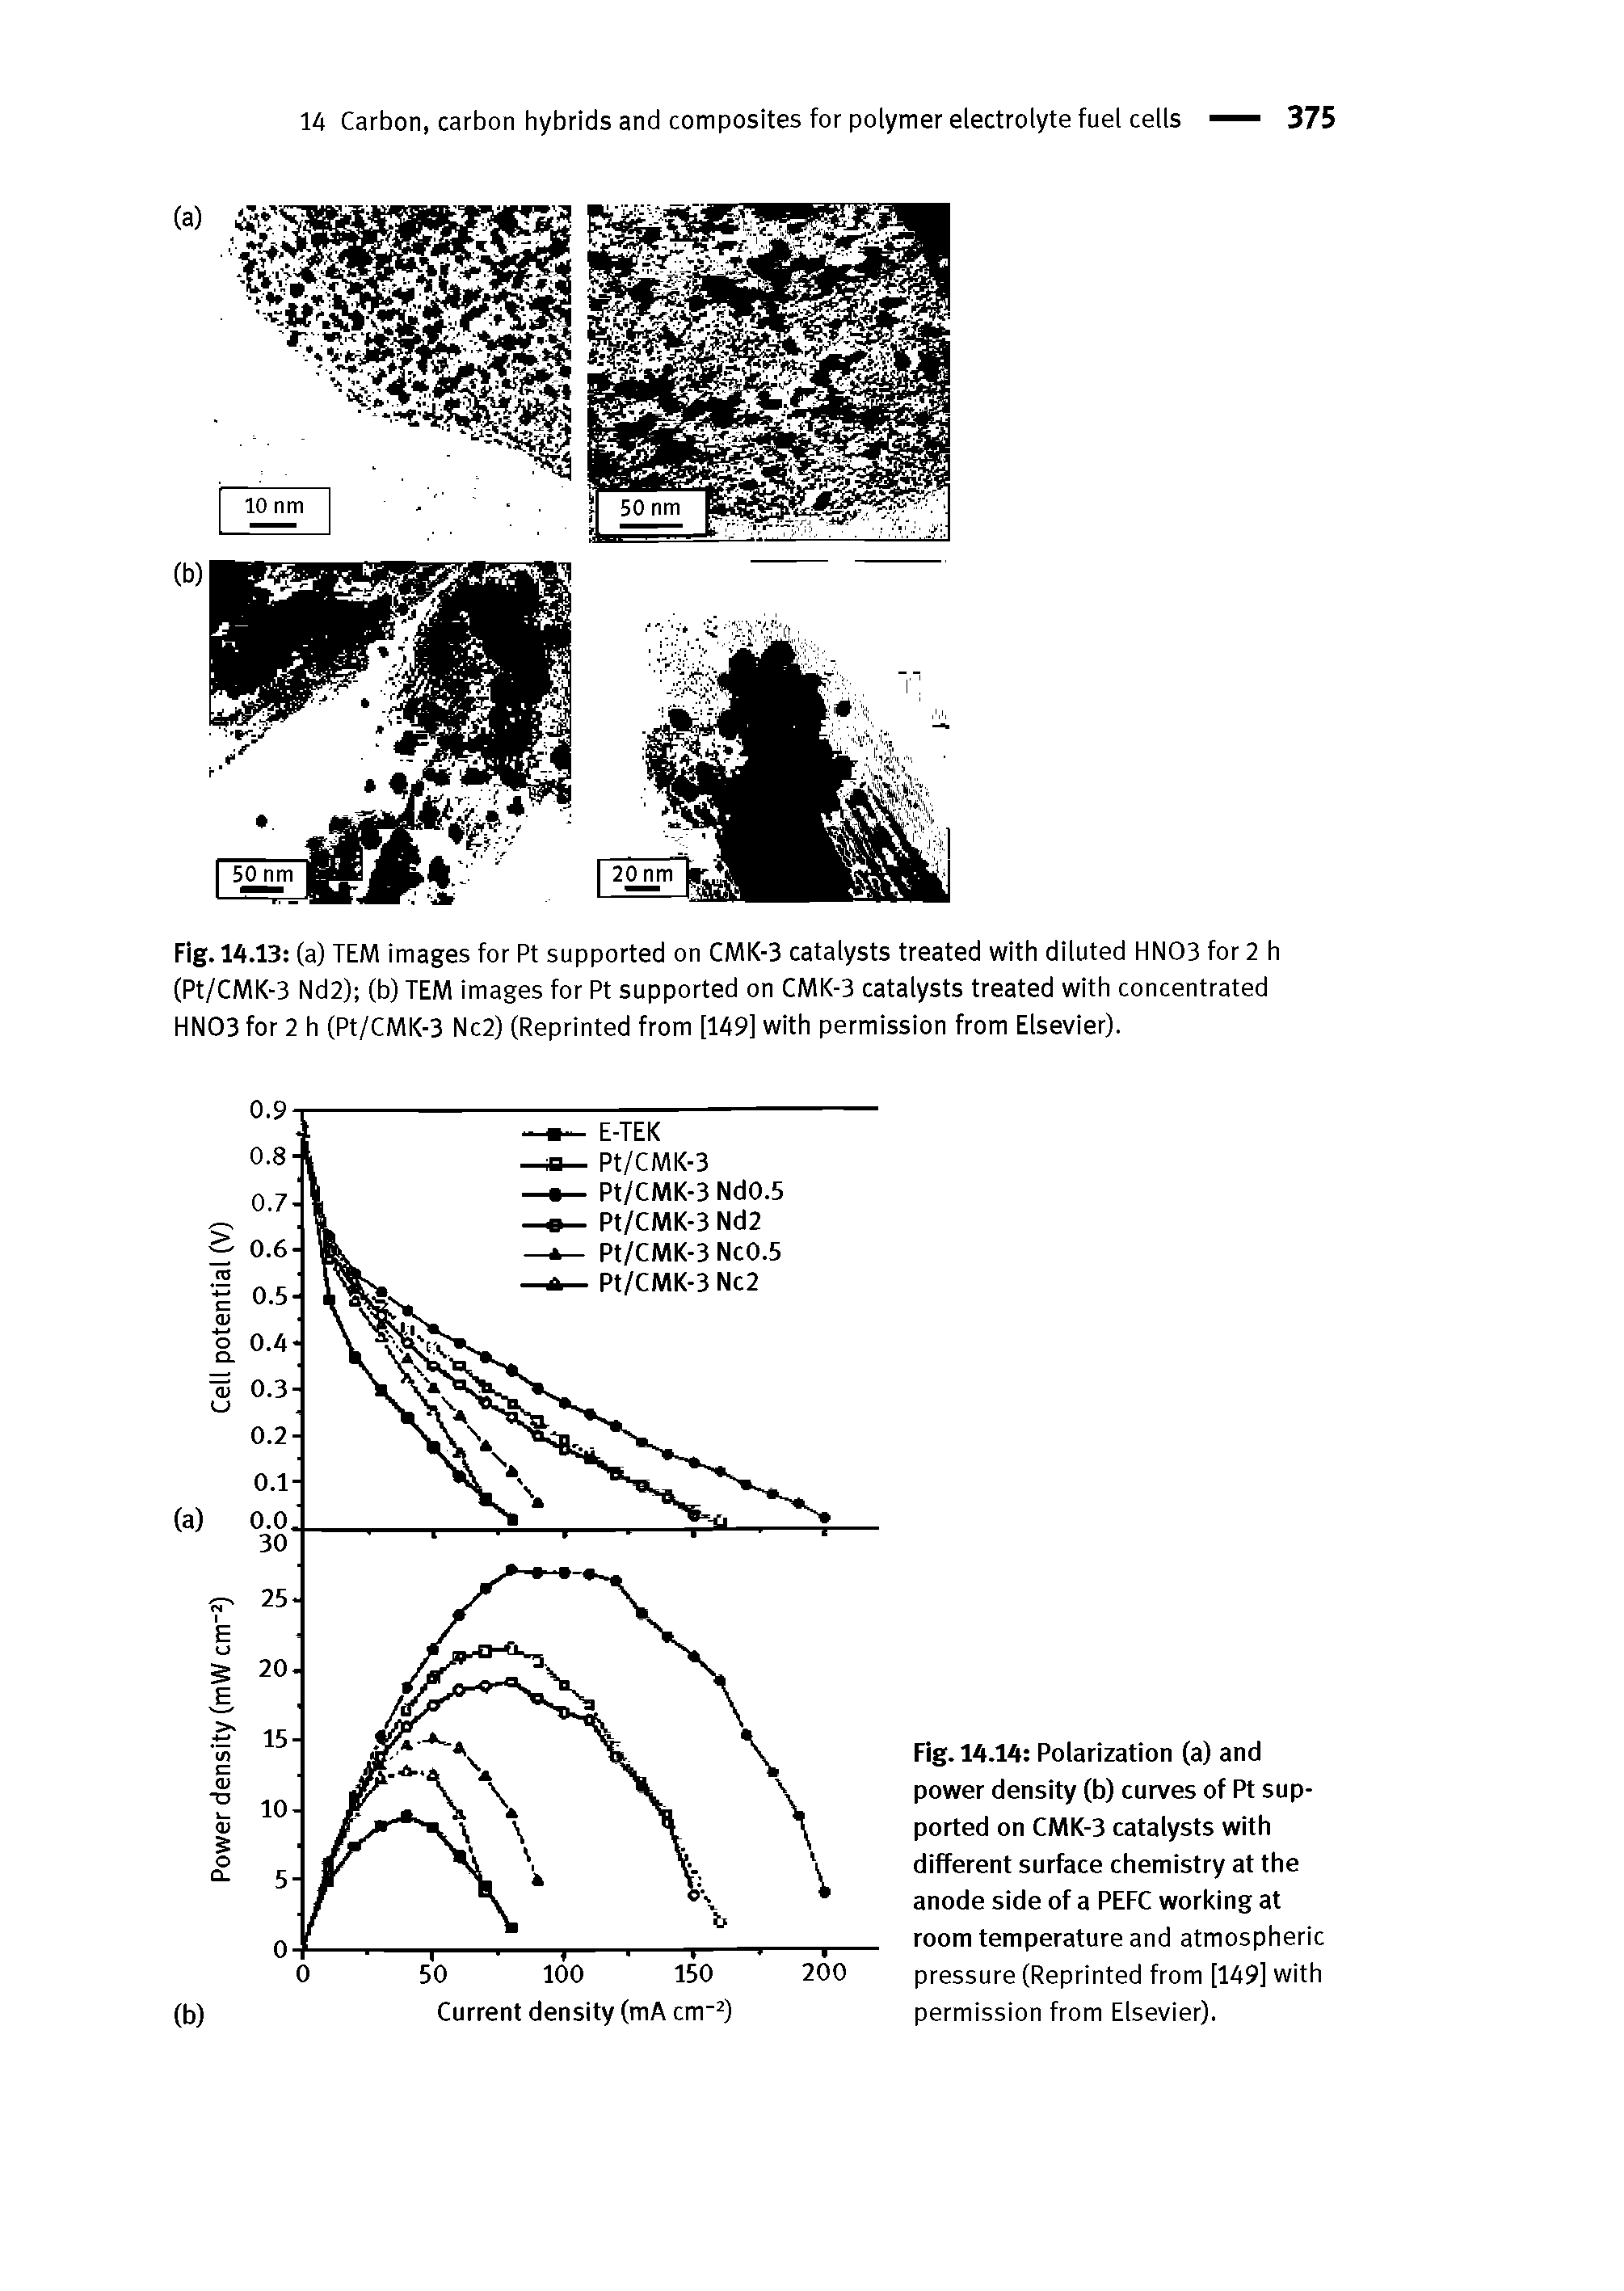 Fig. 14.14 Polarization (a) and power density (b) curves of Pt supported on CMK-3 catalysts with different surface chemistry at the anode side of a PEFC working at room temperature and atmospheric pressure (Reprinted from [149] with permission from Elsevier).